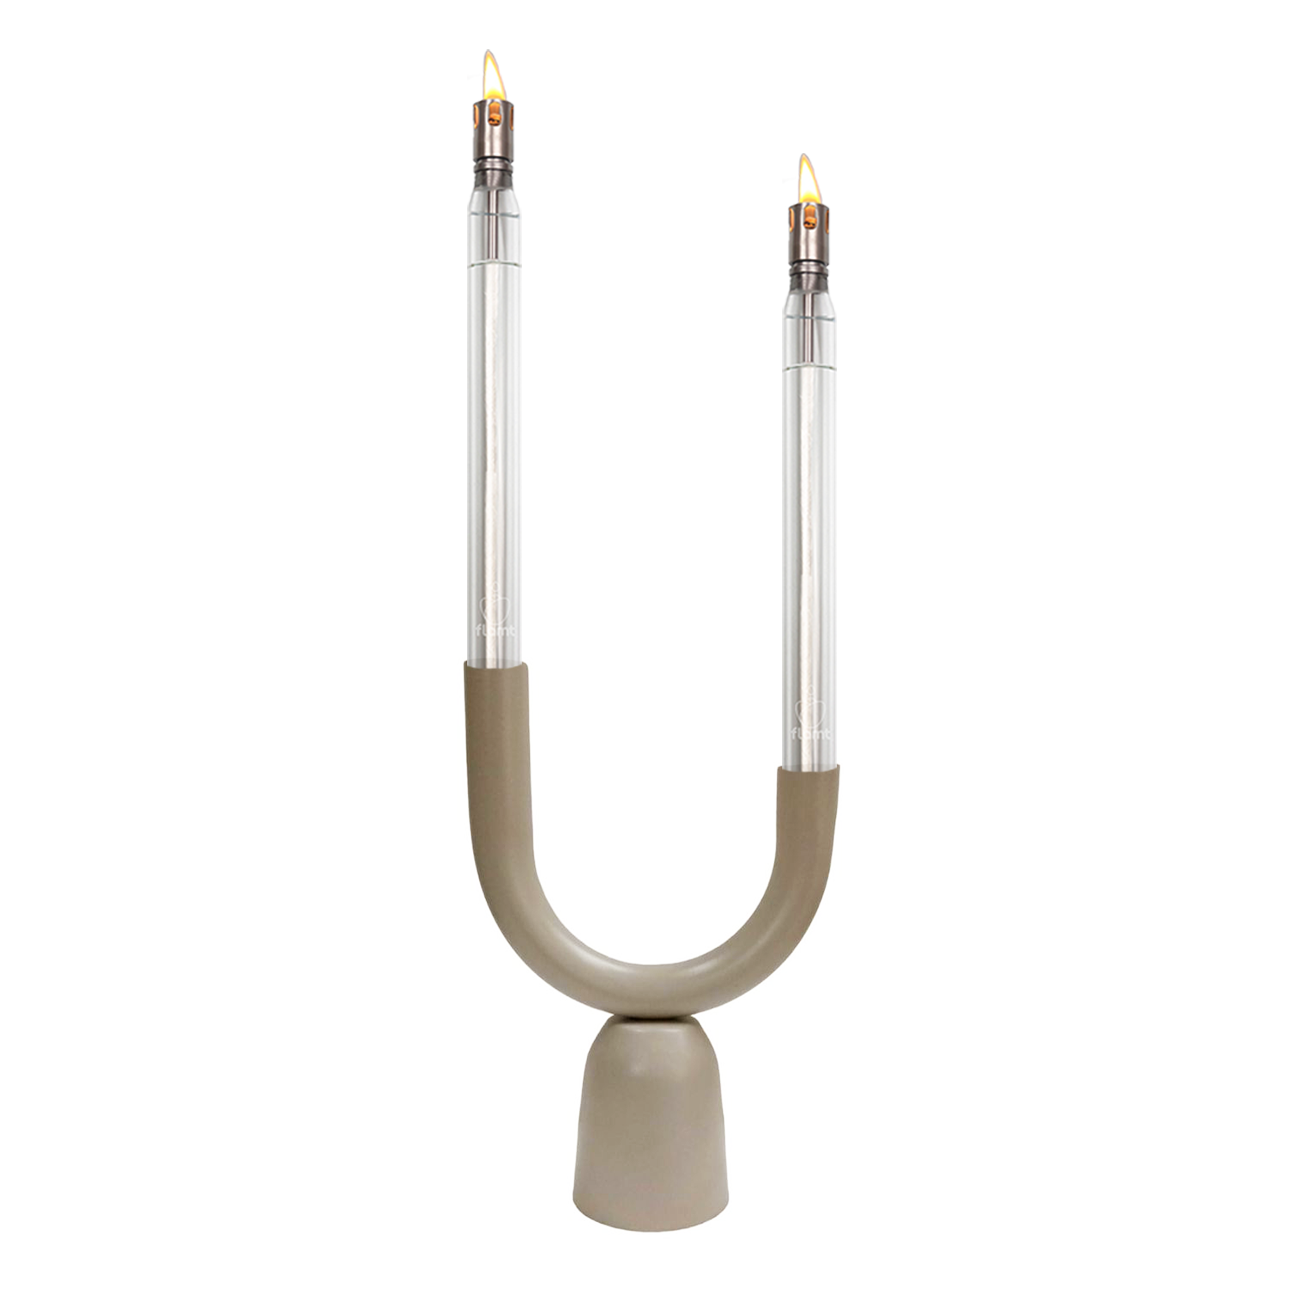 Combi Deal: Flamt Candle 3.1 + Candlestick Bodil Beige